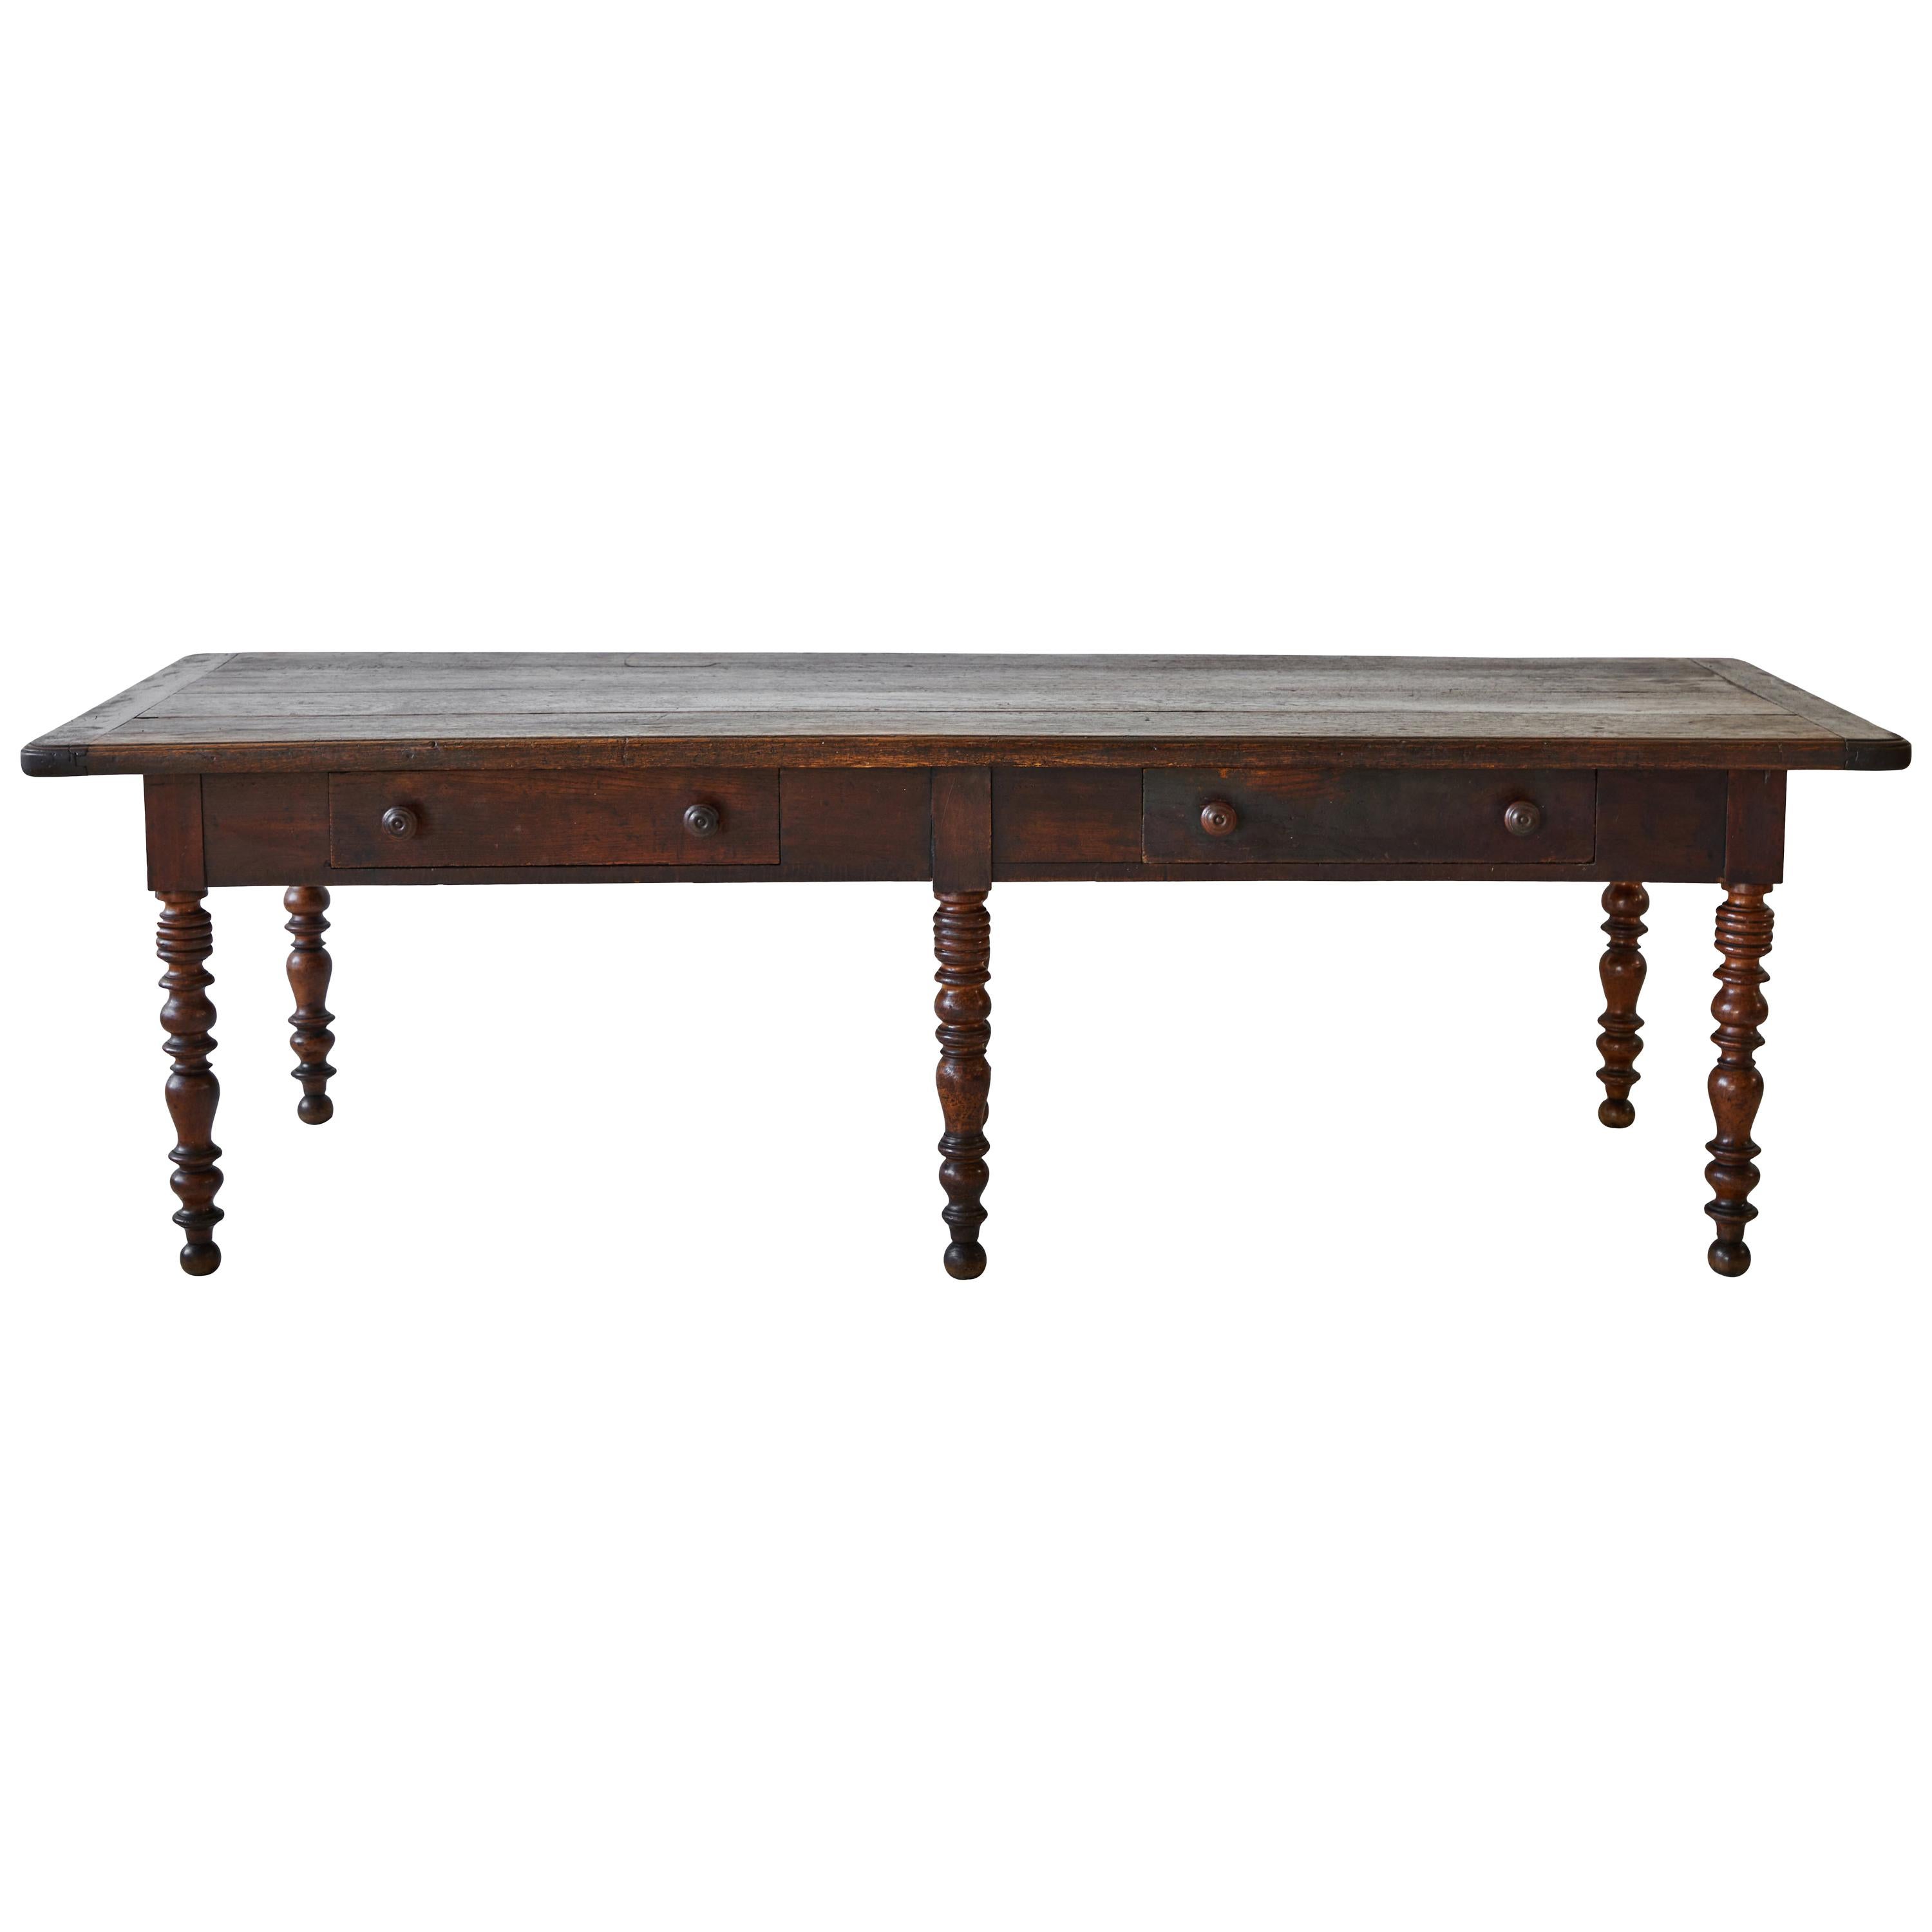 French Long Table with Turned Legs